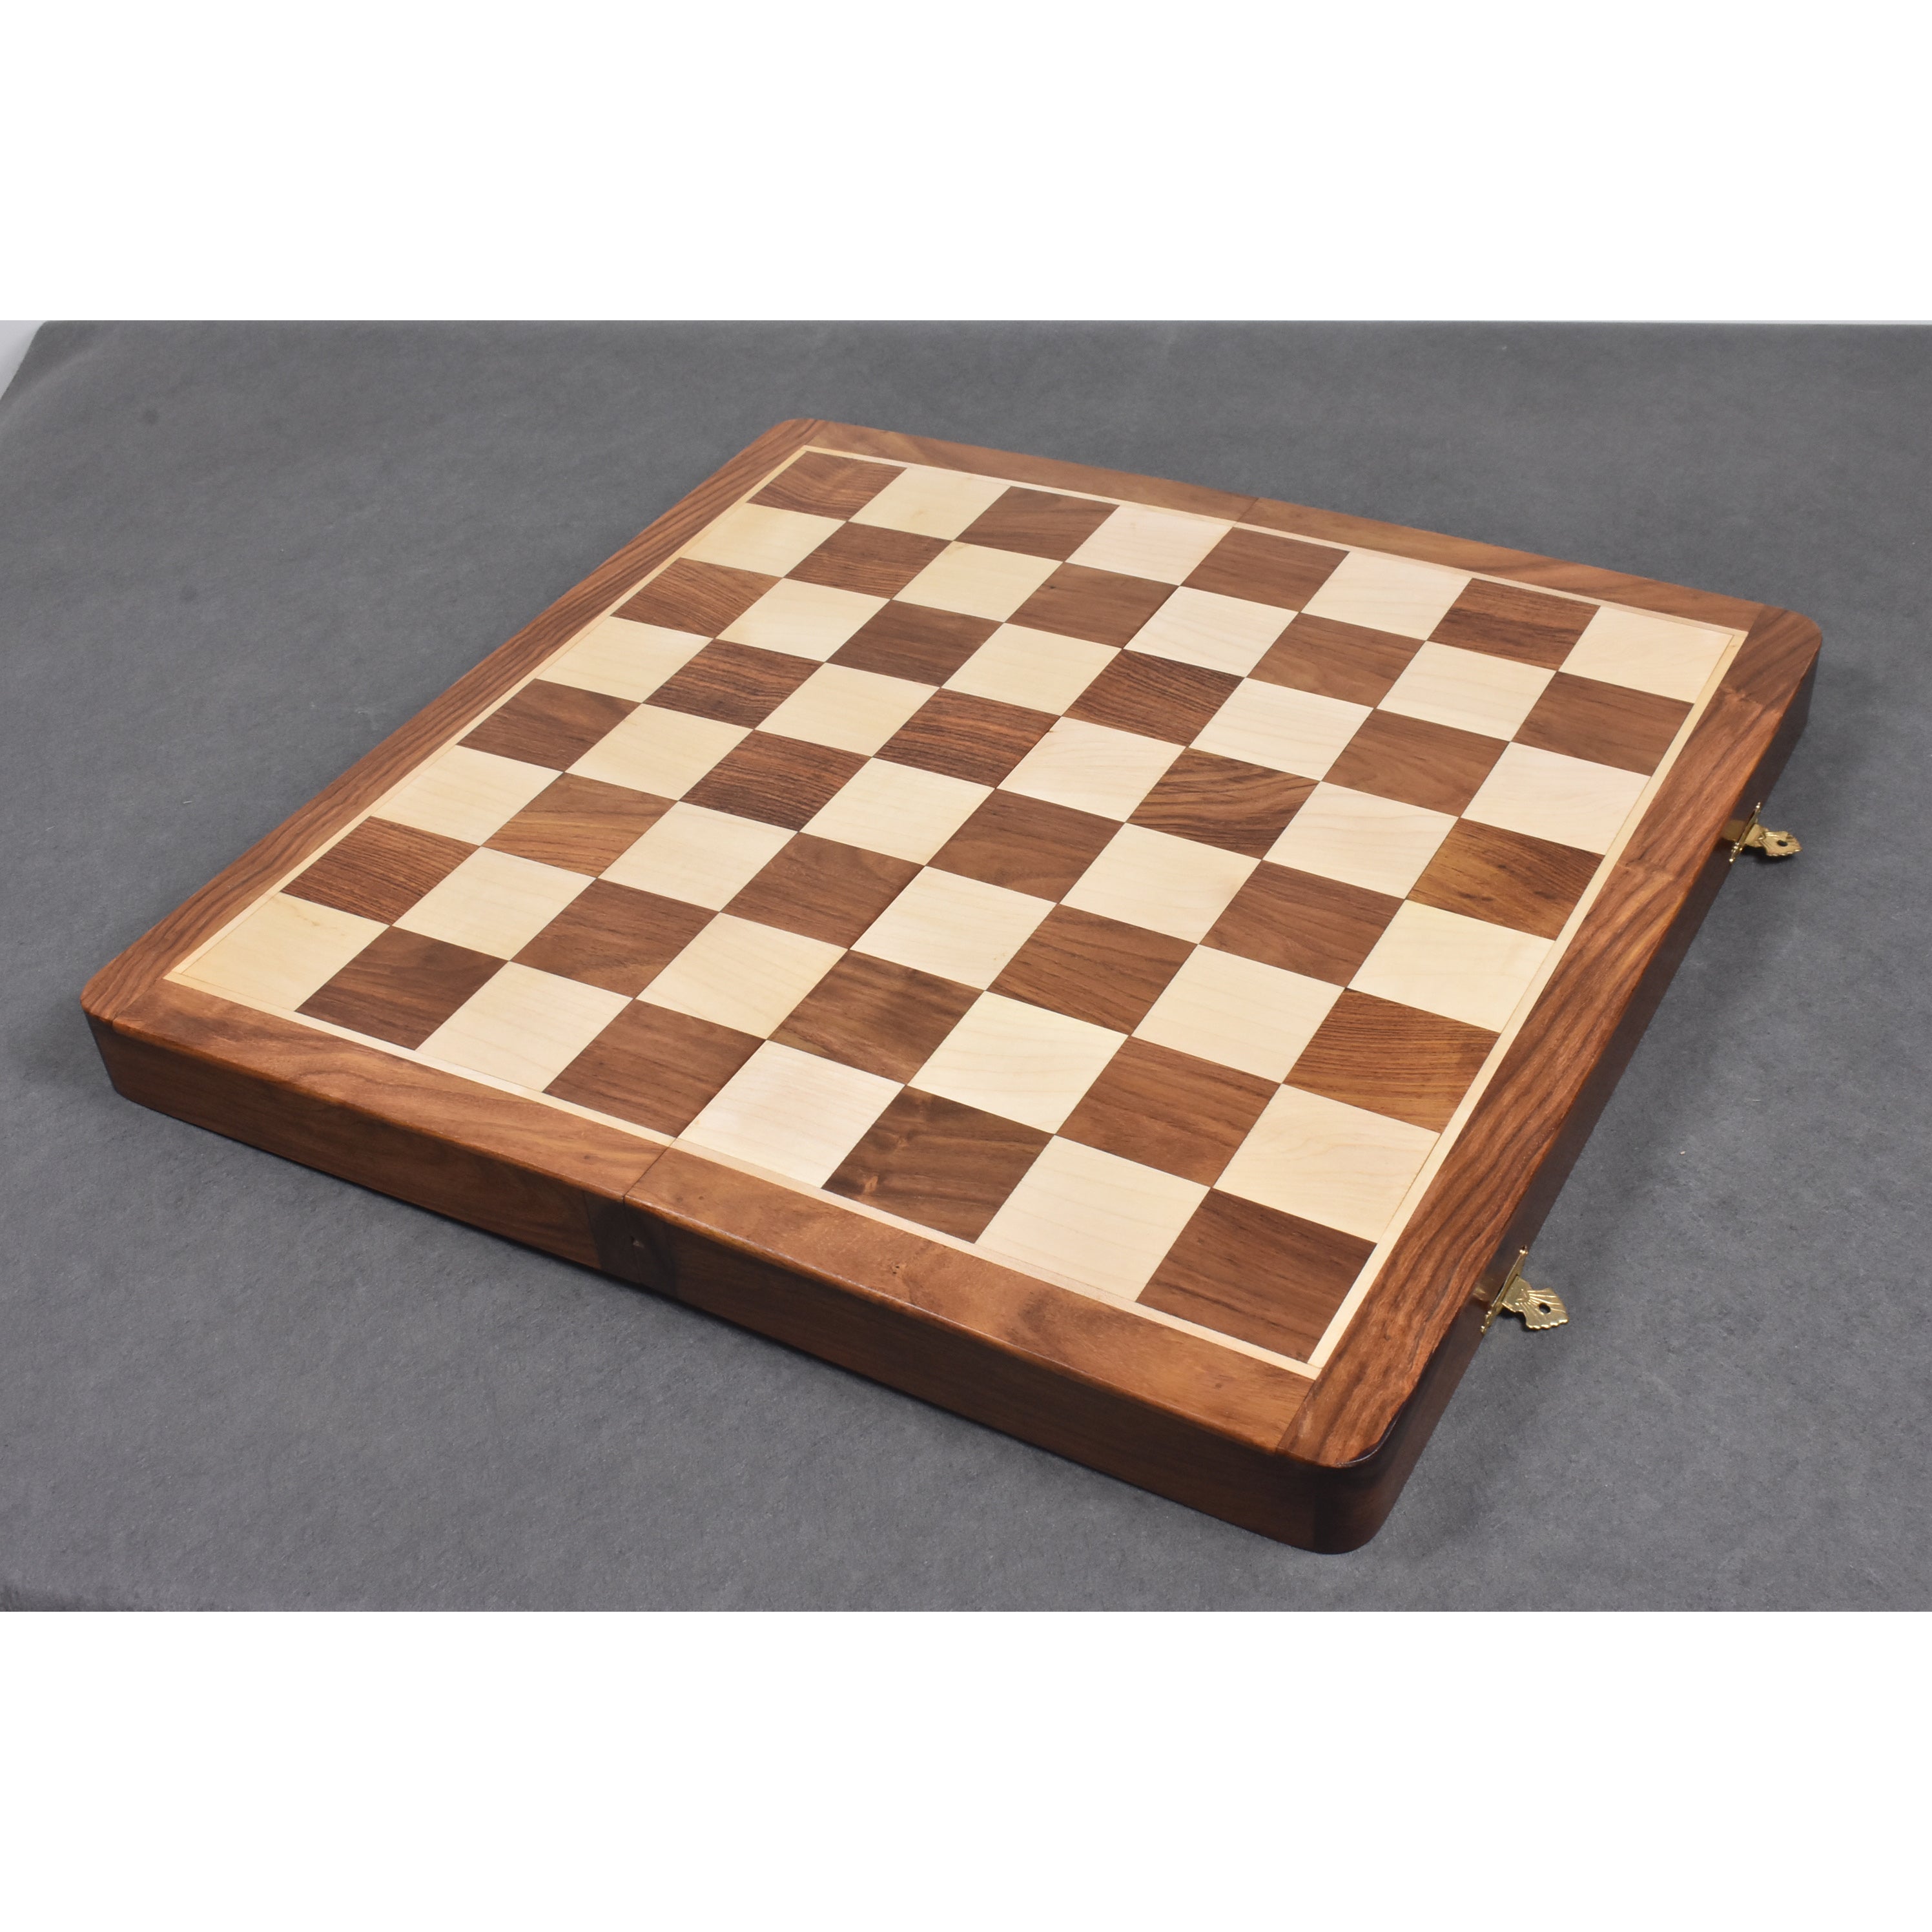 20 Standard Mahogany Chess Board with Coordinates - 55mm Square